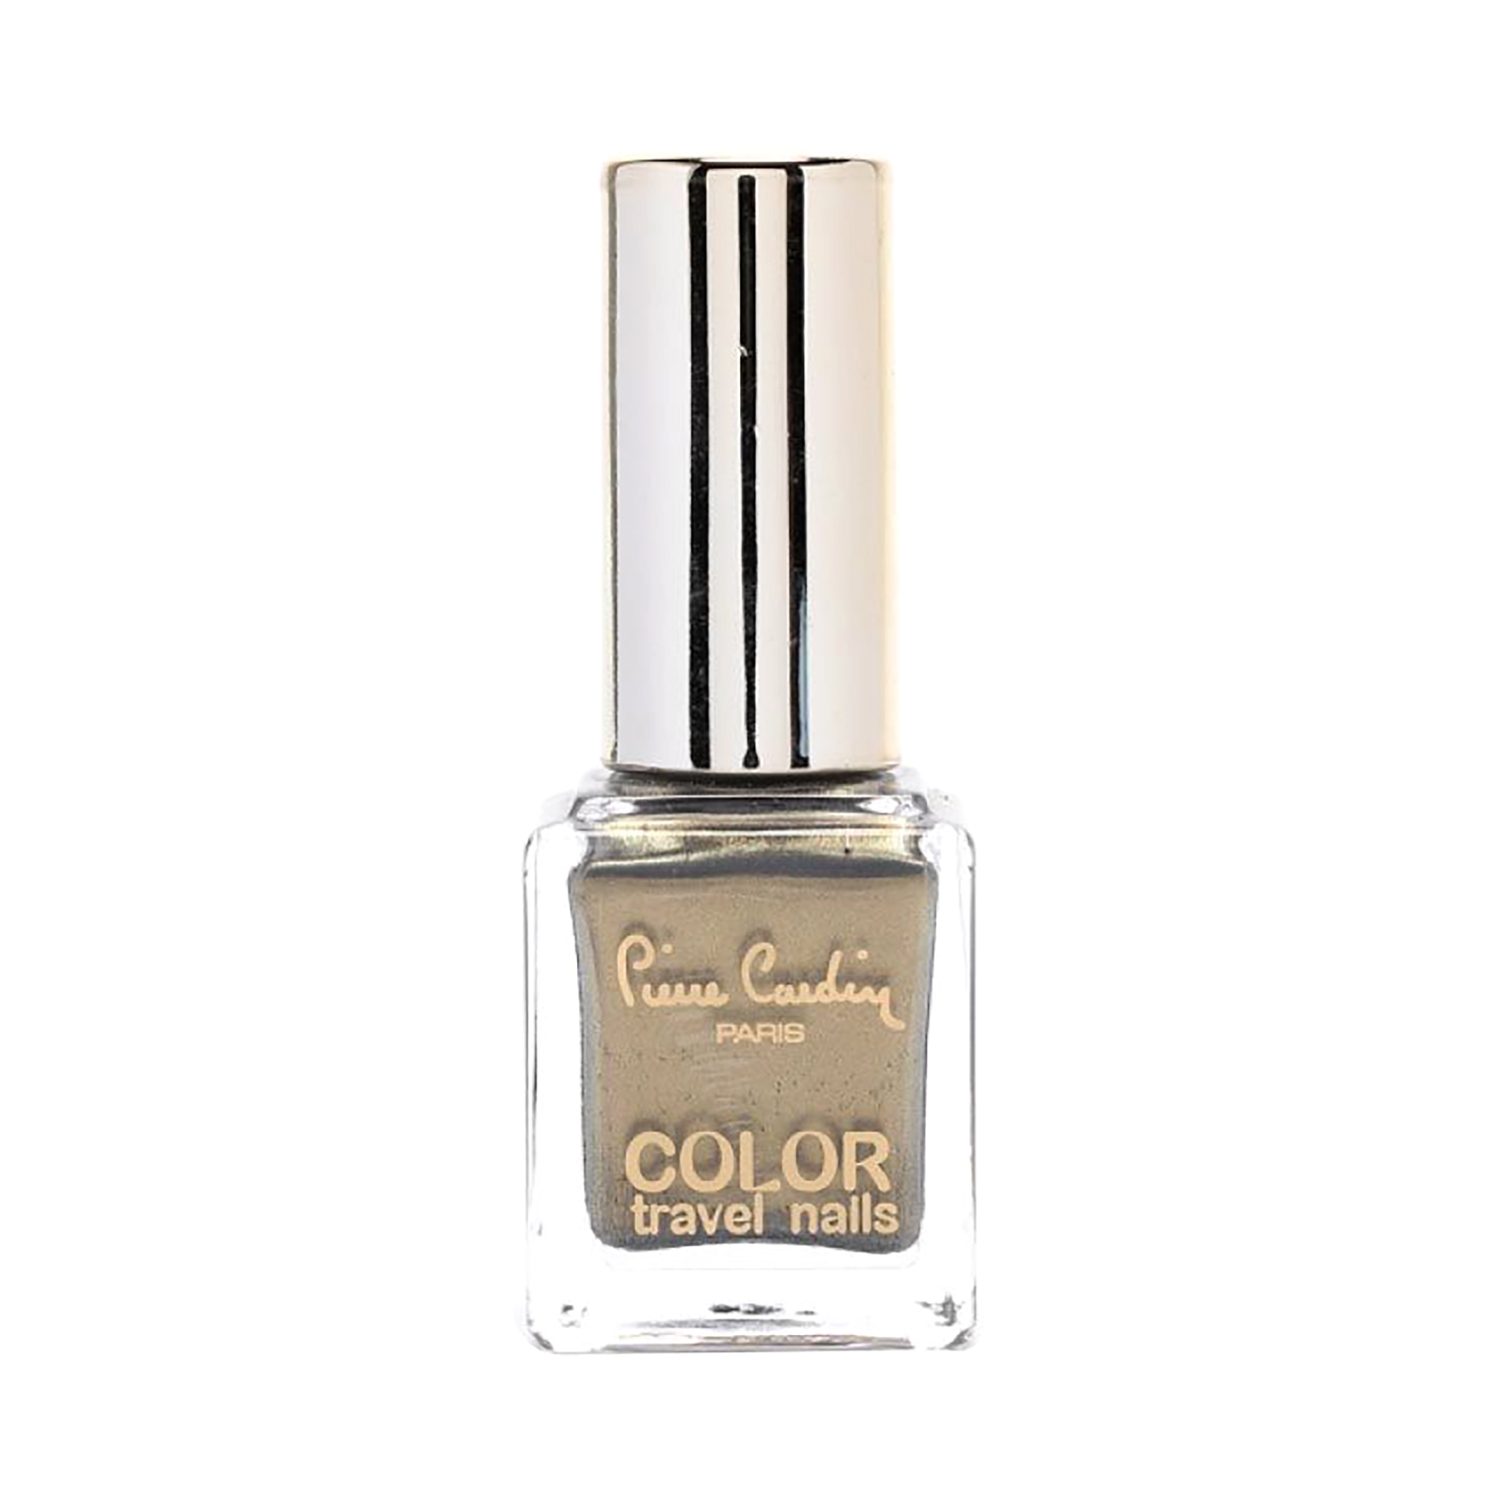 Pierre Cardin Paris | Pierre Cardin Paris Color Travel Nails - 104-Pearly Green To Yellow (11.5ml)